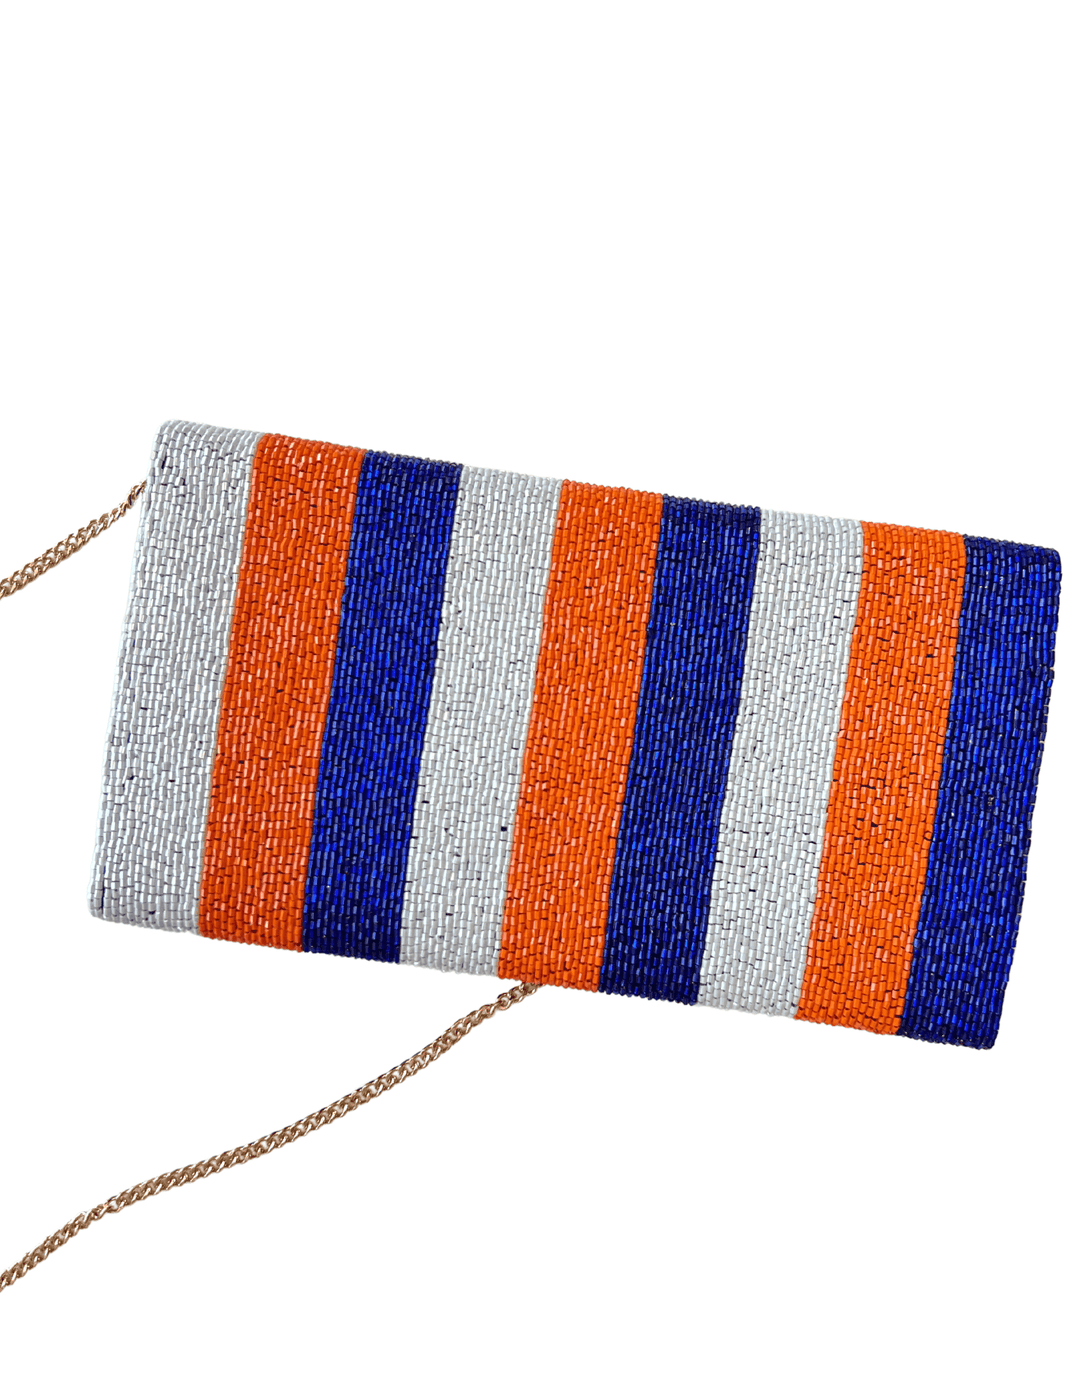 Houston astros women's gifts white navy and orange beaded clutch